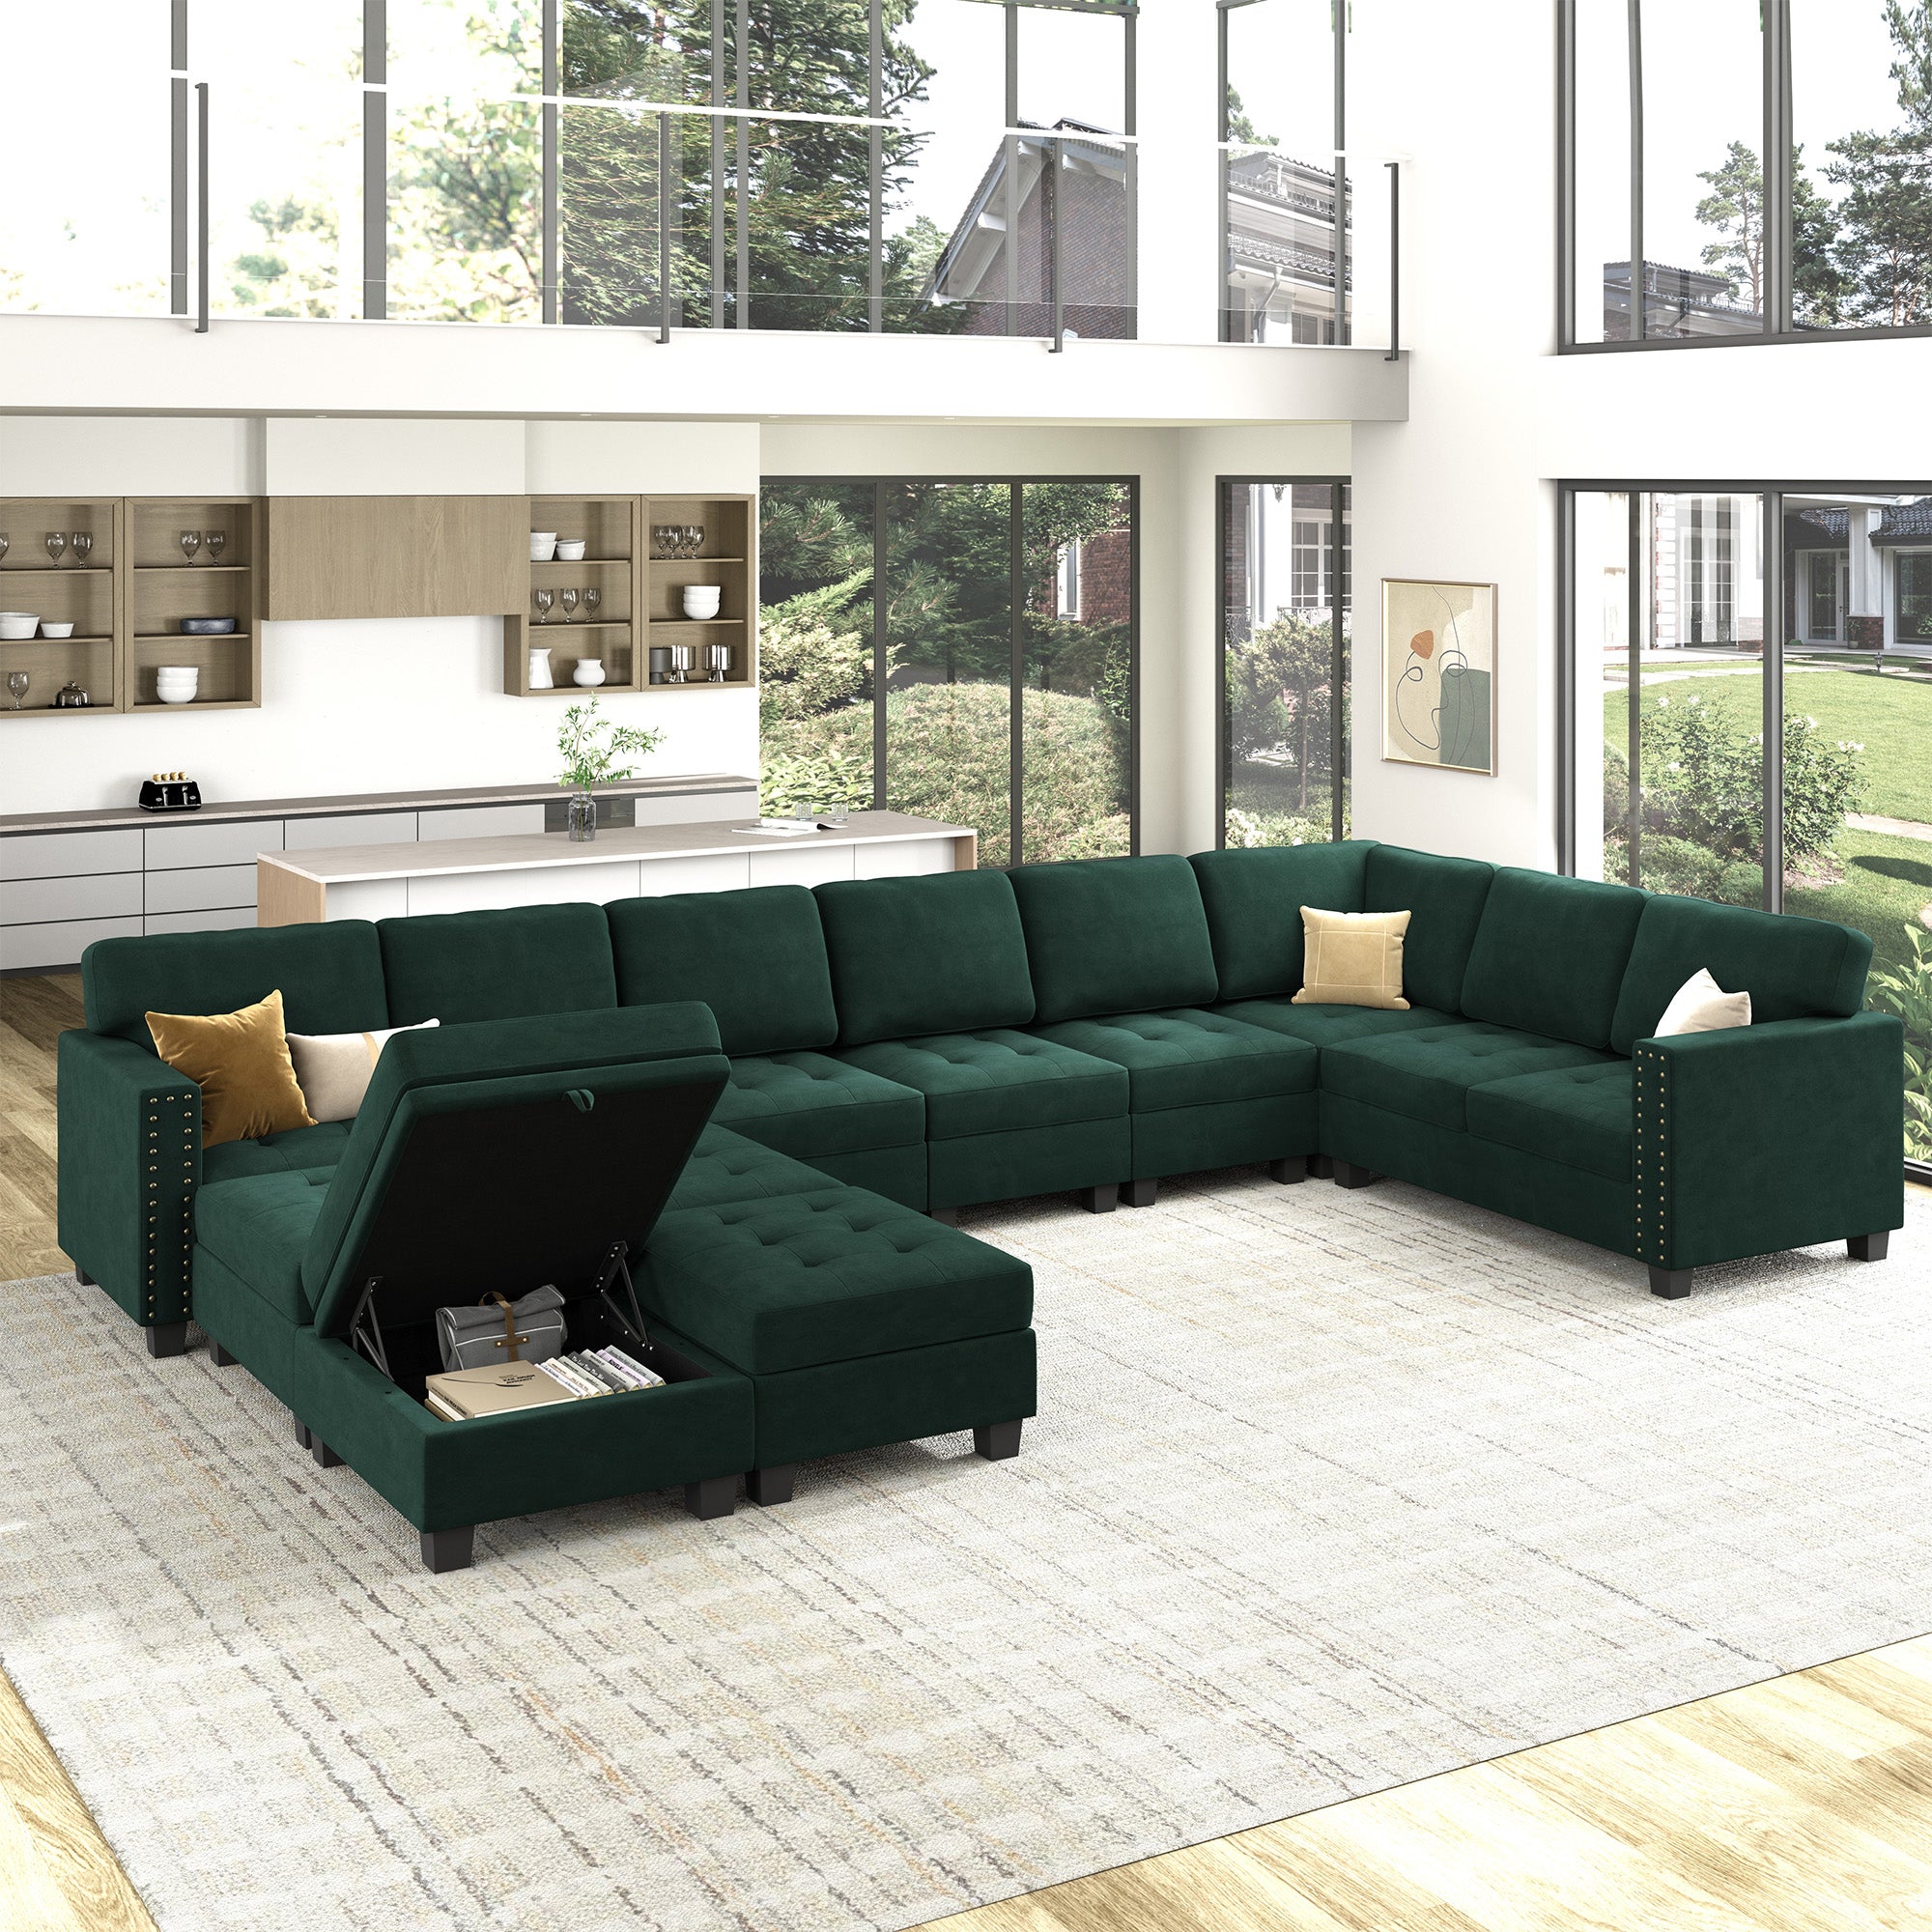 HONBAY Wraparound Modular Sofa 12-Seat With 1-Storage Space+1-Left Arm+1-Right Arm #Color_Green